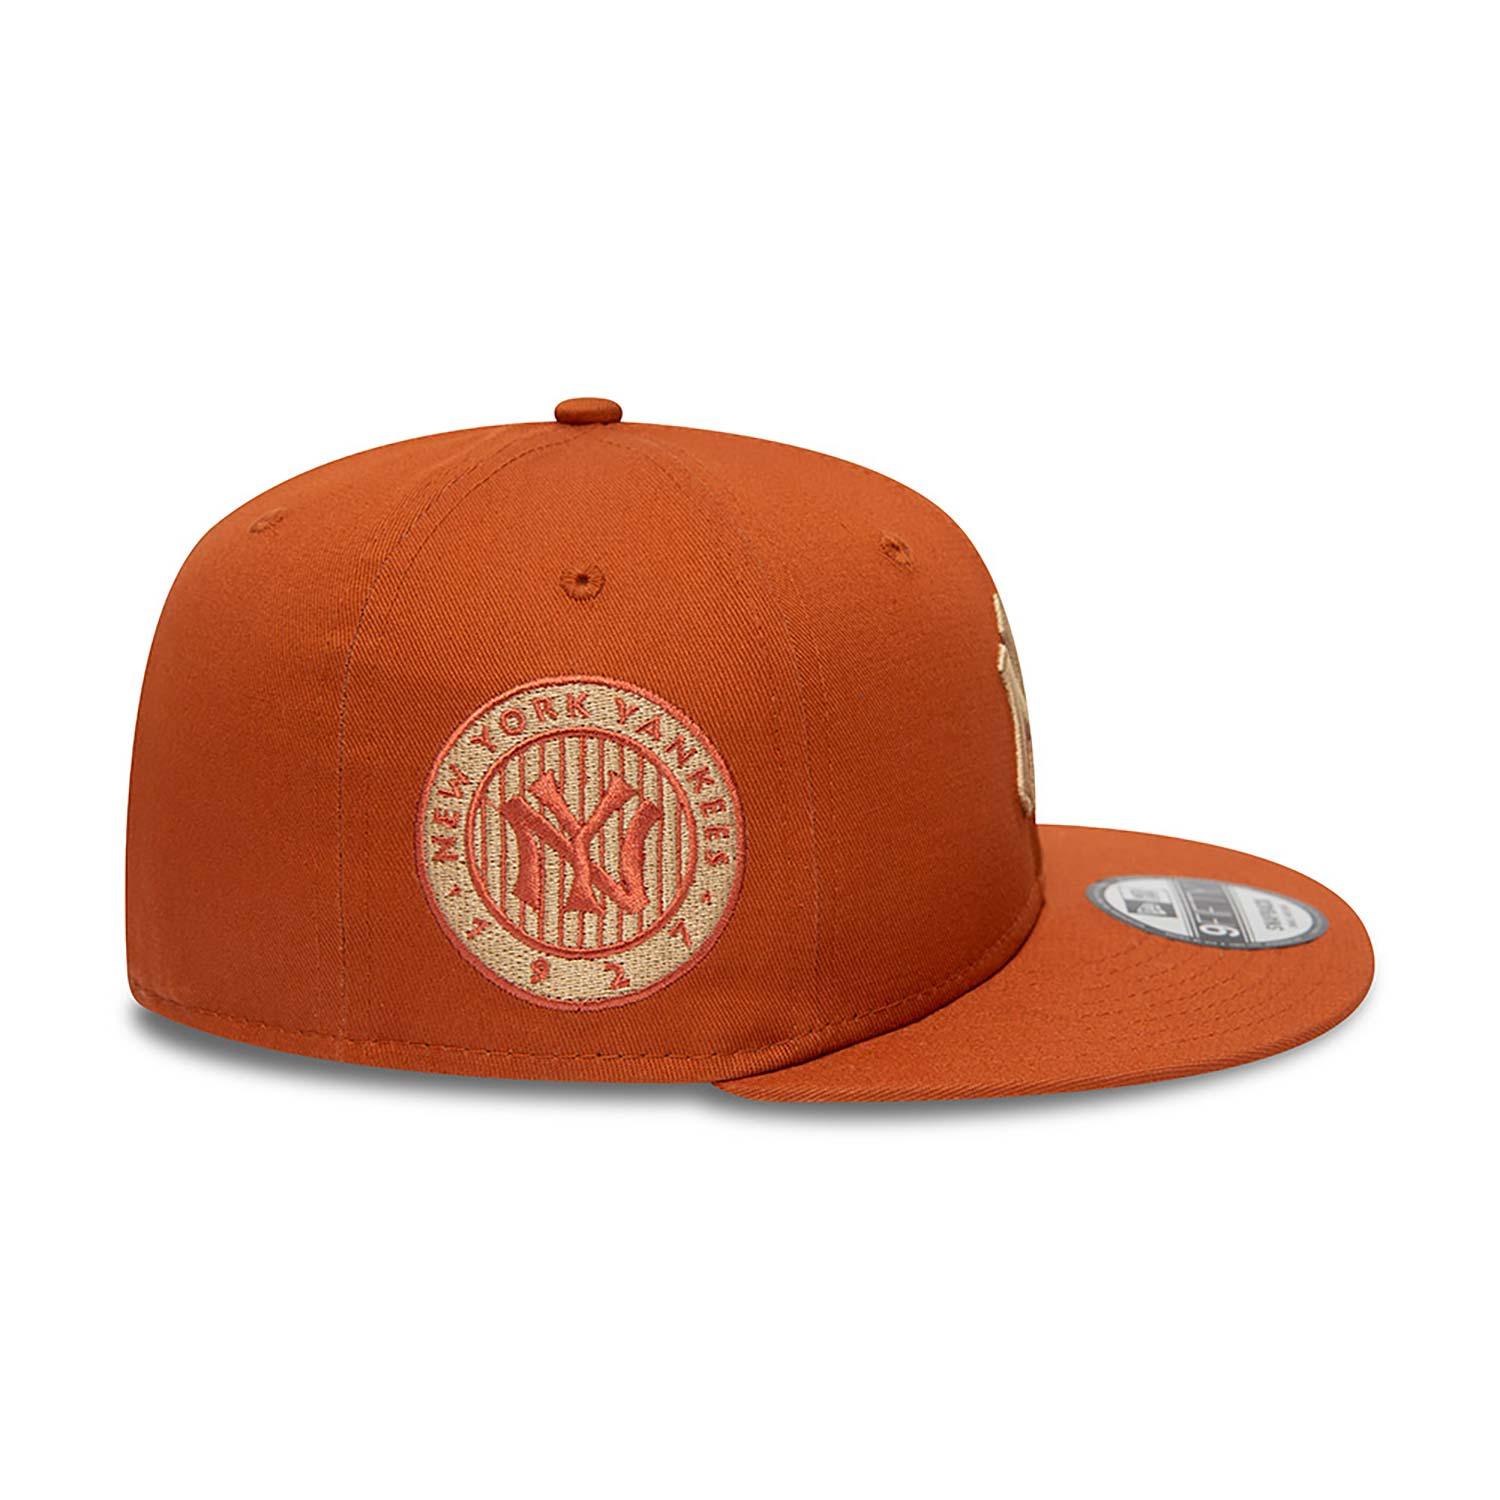 NEW ERA 9FIFTY SIDE PATCH NEW YORK YANKEES RUST SNAPBACK - FAM